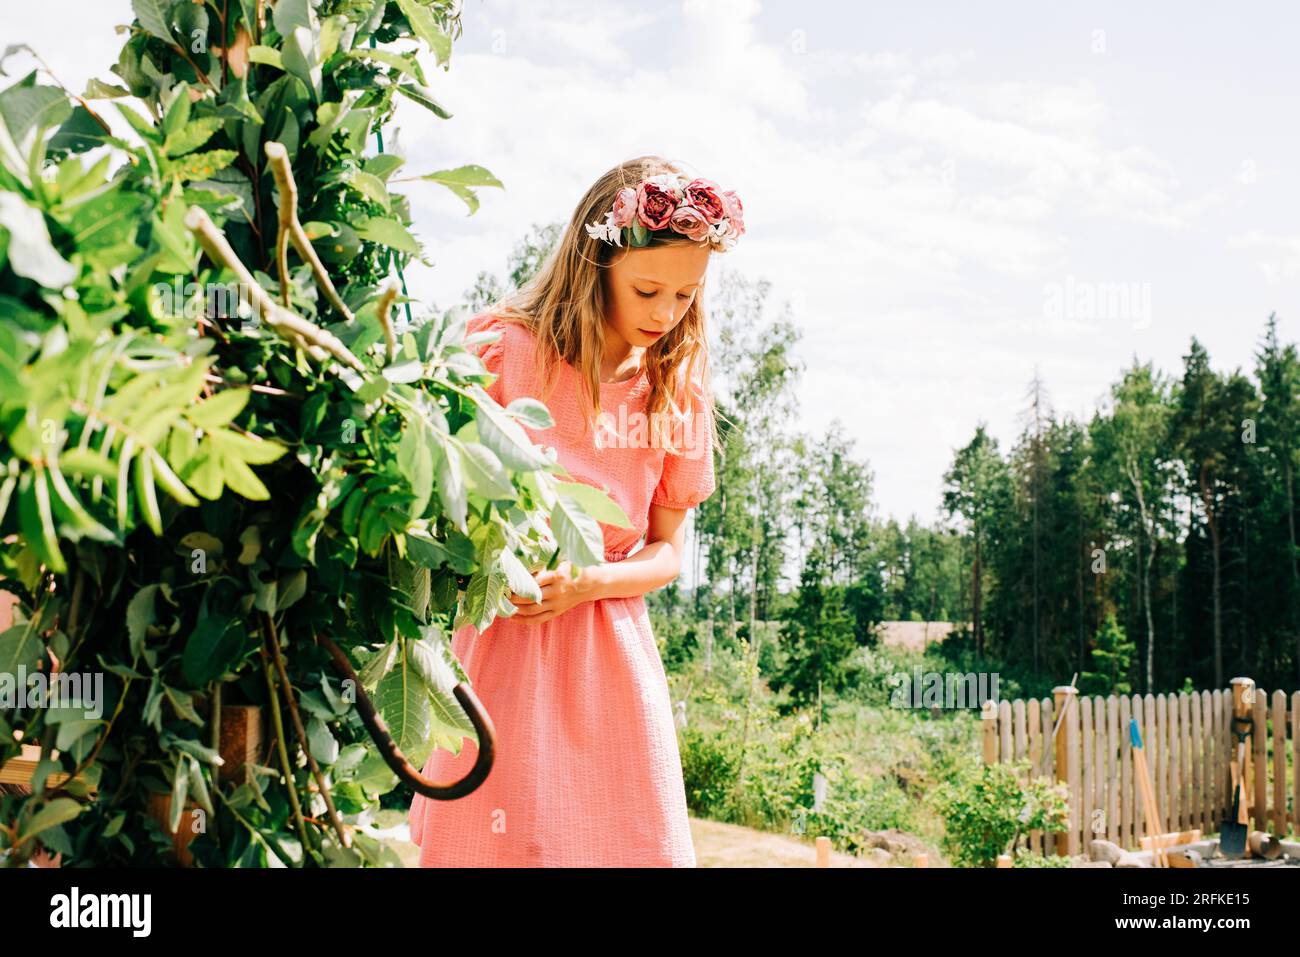 girl with midsommar hairband decorating the midsummer pole Stock Photo